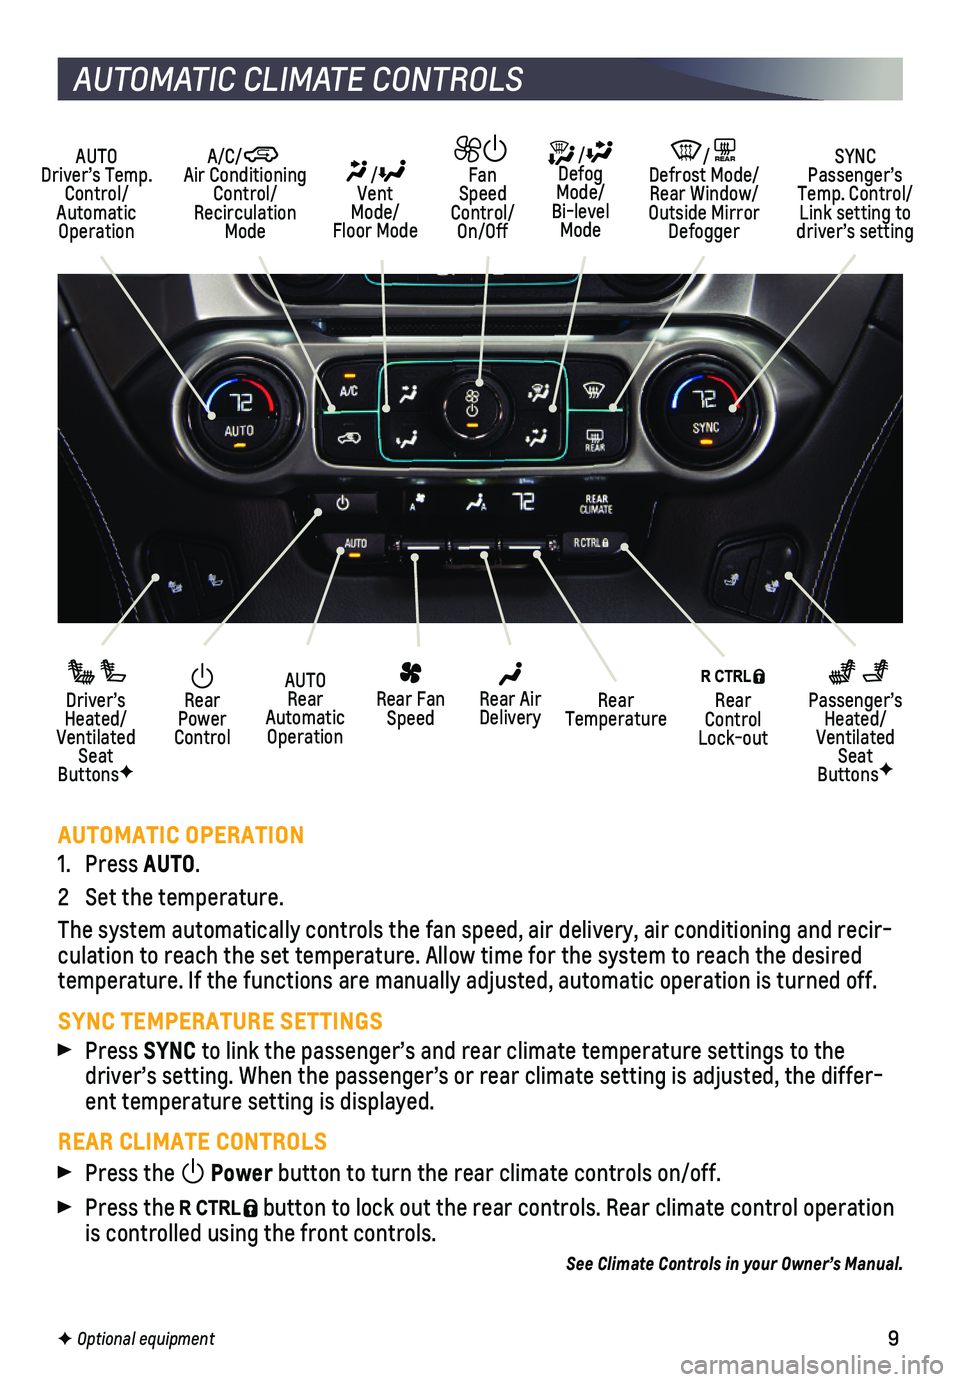 CHEVROLET SUBURBAN 2019  Get To Know Guide 9
HEAD-UP DISPLAY
AUTOMATIC OPERATION
1. Press AUTO.
2 Set the temperature. 
The system automatically controls the fan speed, air delivery, air condi\
tioning and recir-culation to reach the set tempe